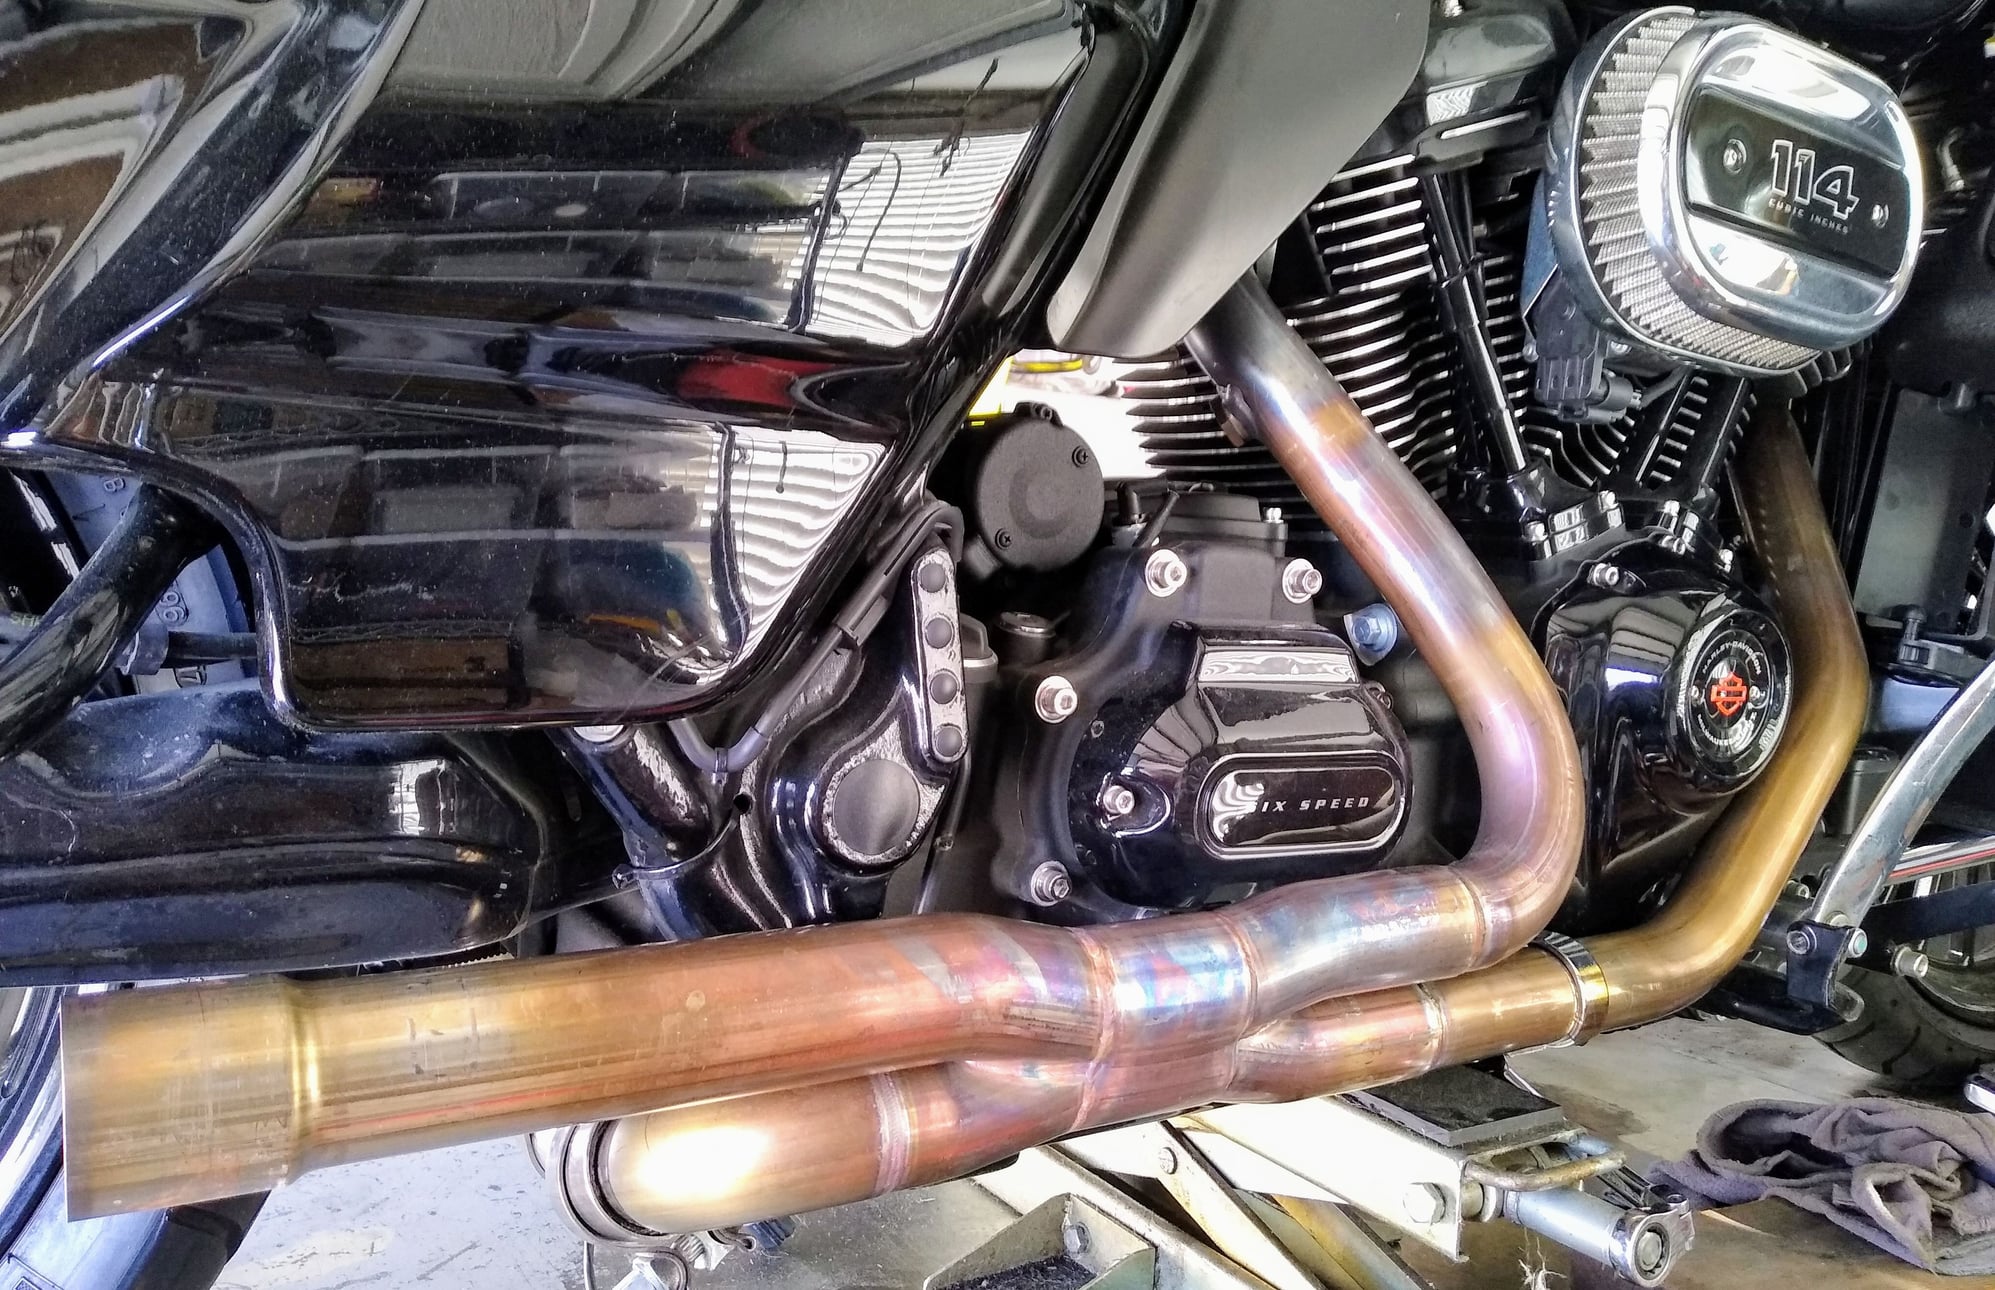 M8 exhaust - Page 2 - Harley Davidson Forums